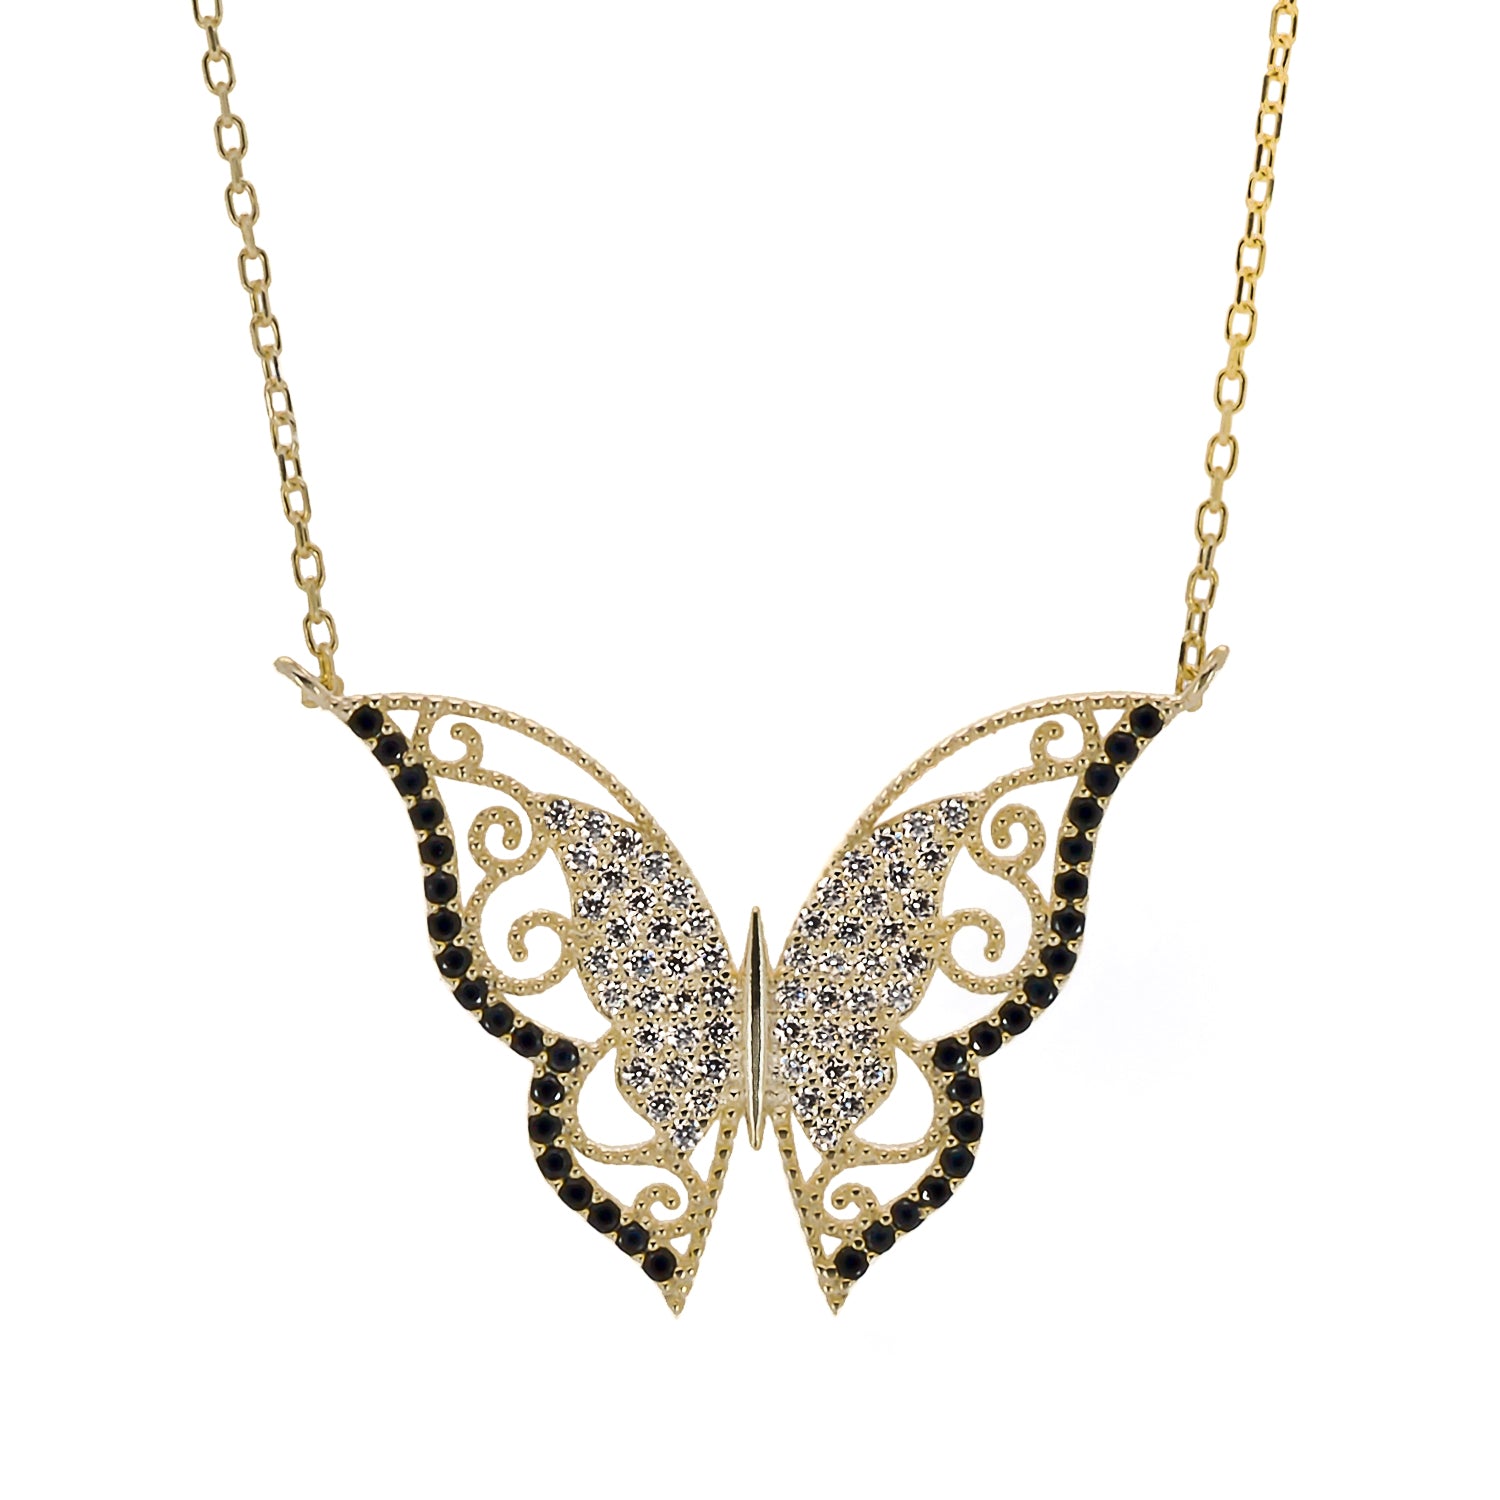 Gold Sparkly Joyful Butterfly Necklace featuring a sterling silver chain with an 18K gold plated finish, adorned with a dazzling butterfly pendant adorned with CZ diamonds, white enamel, and blue enamel.